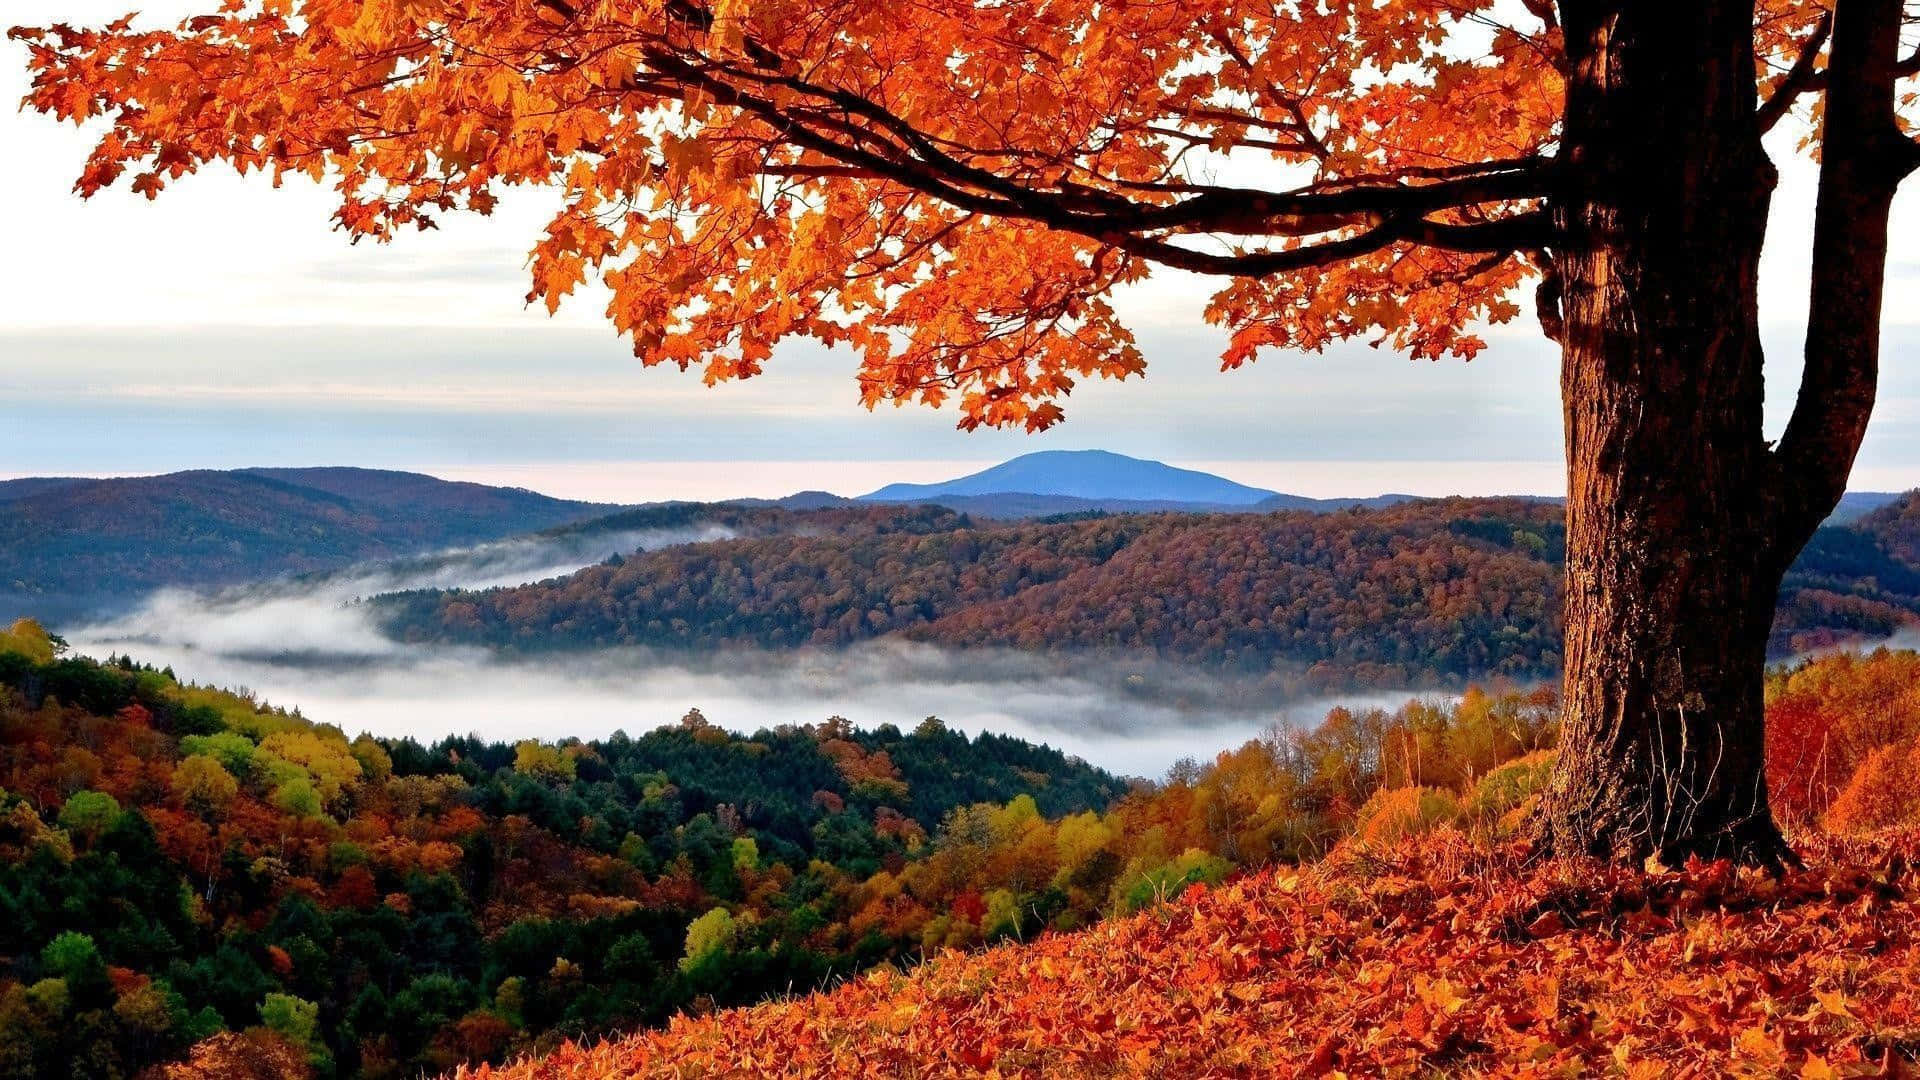 A beautiful fall day perfect for desktop background